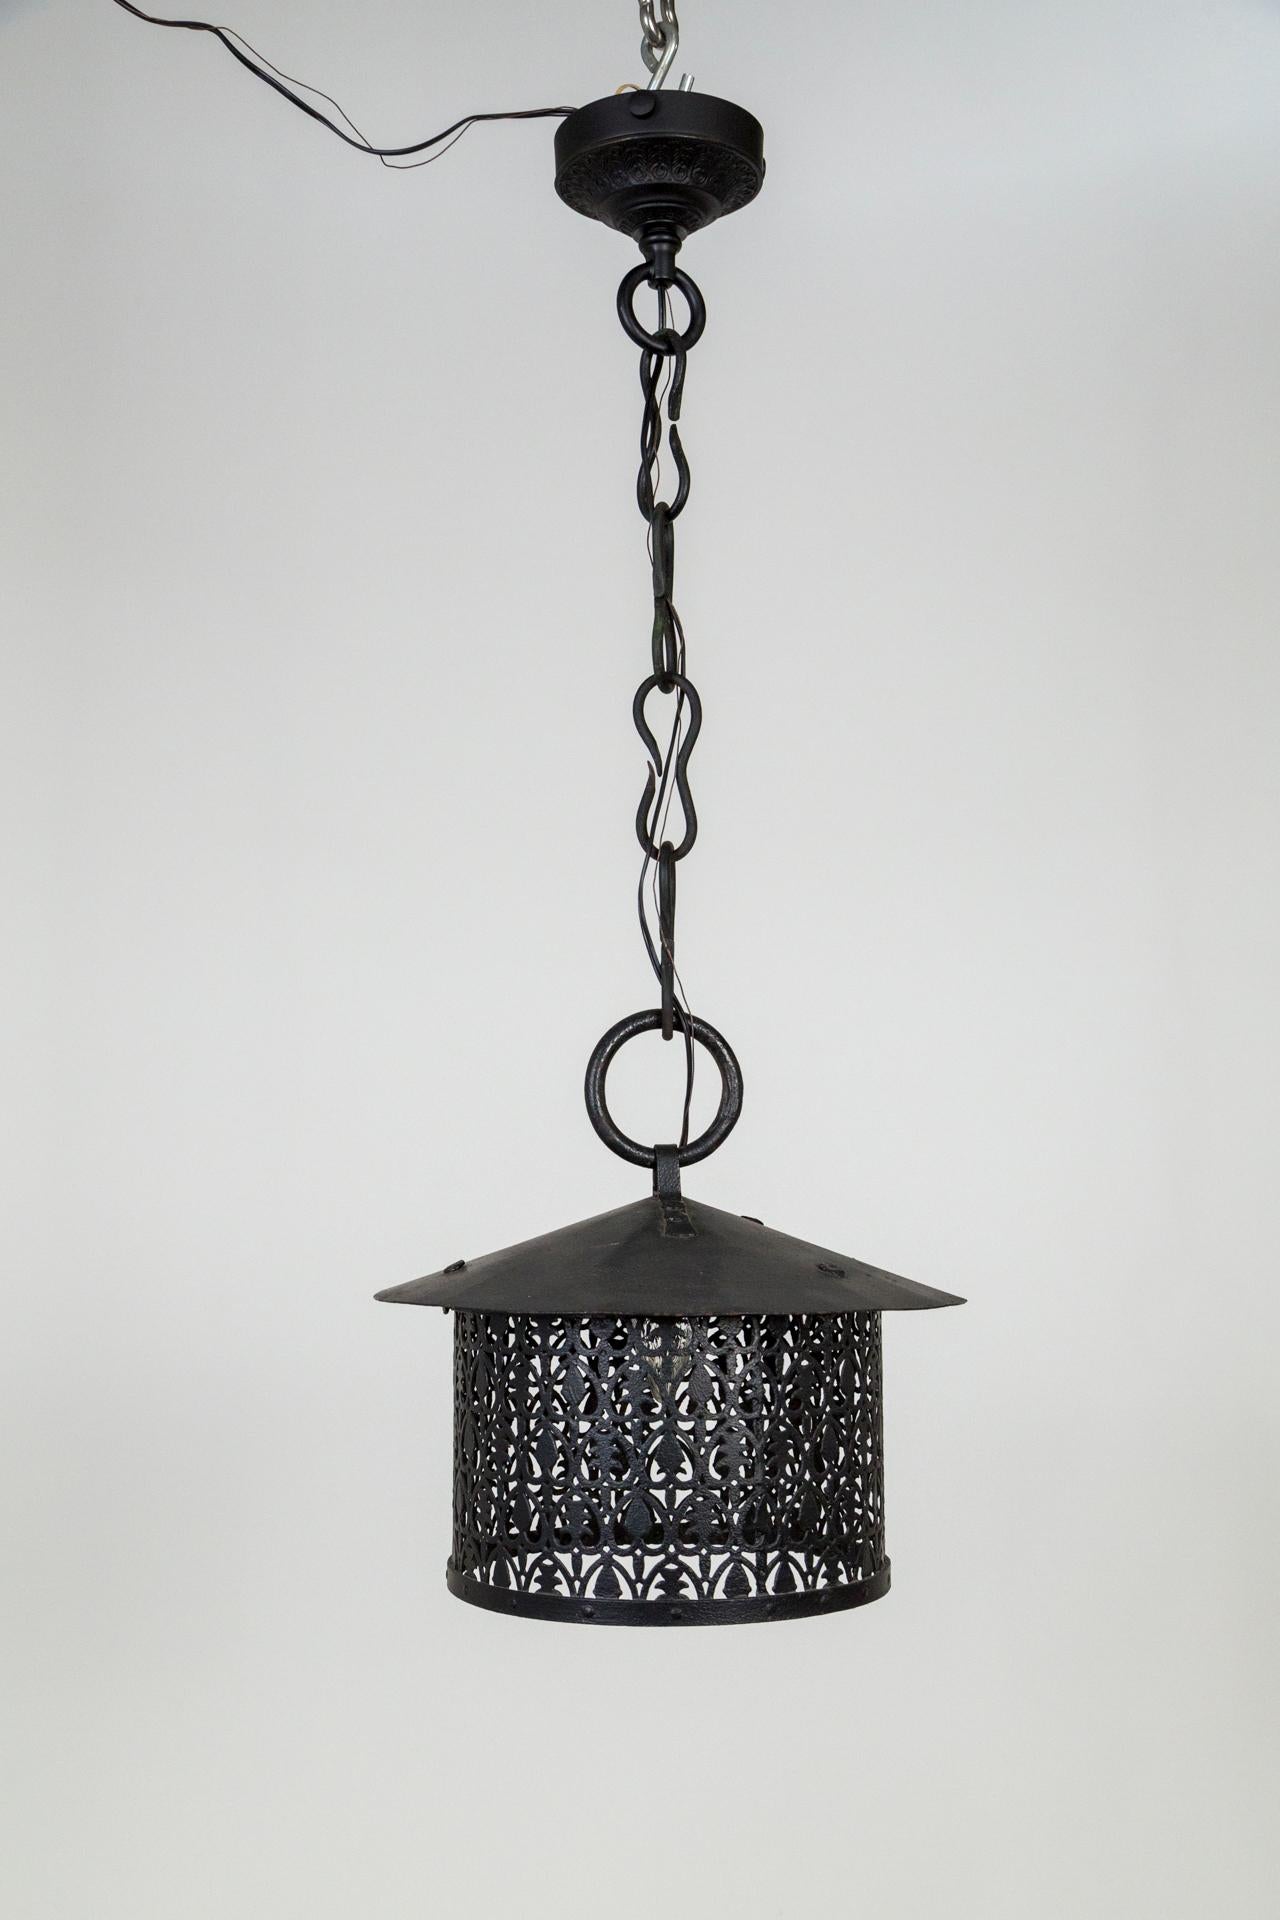 Black Iron Lantern with Decorative Punched Shade In Good Condition For Sale In San Francisco, CA